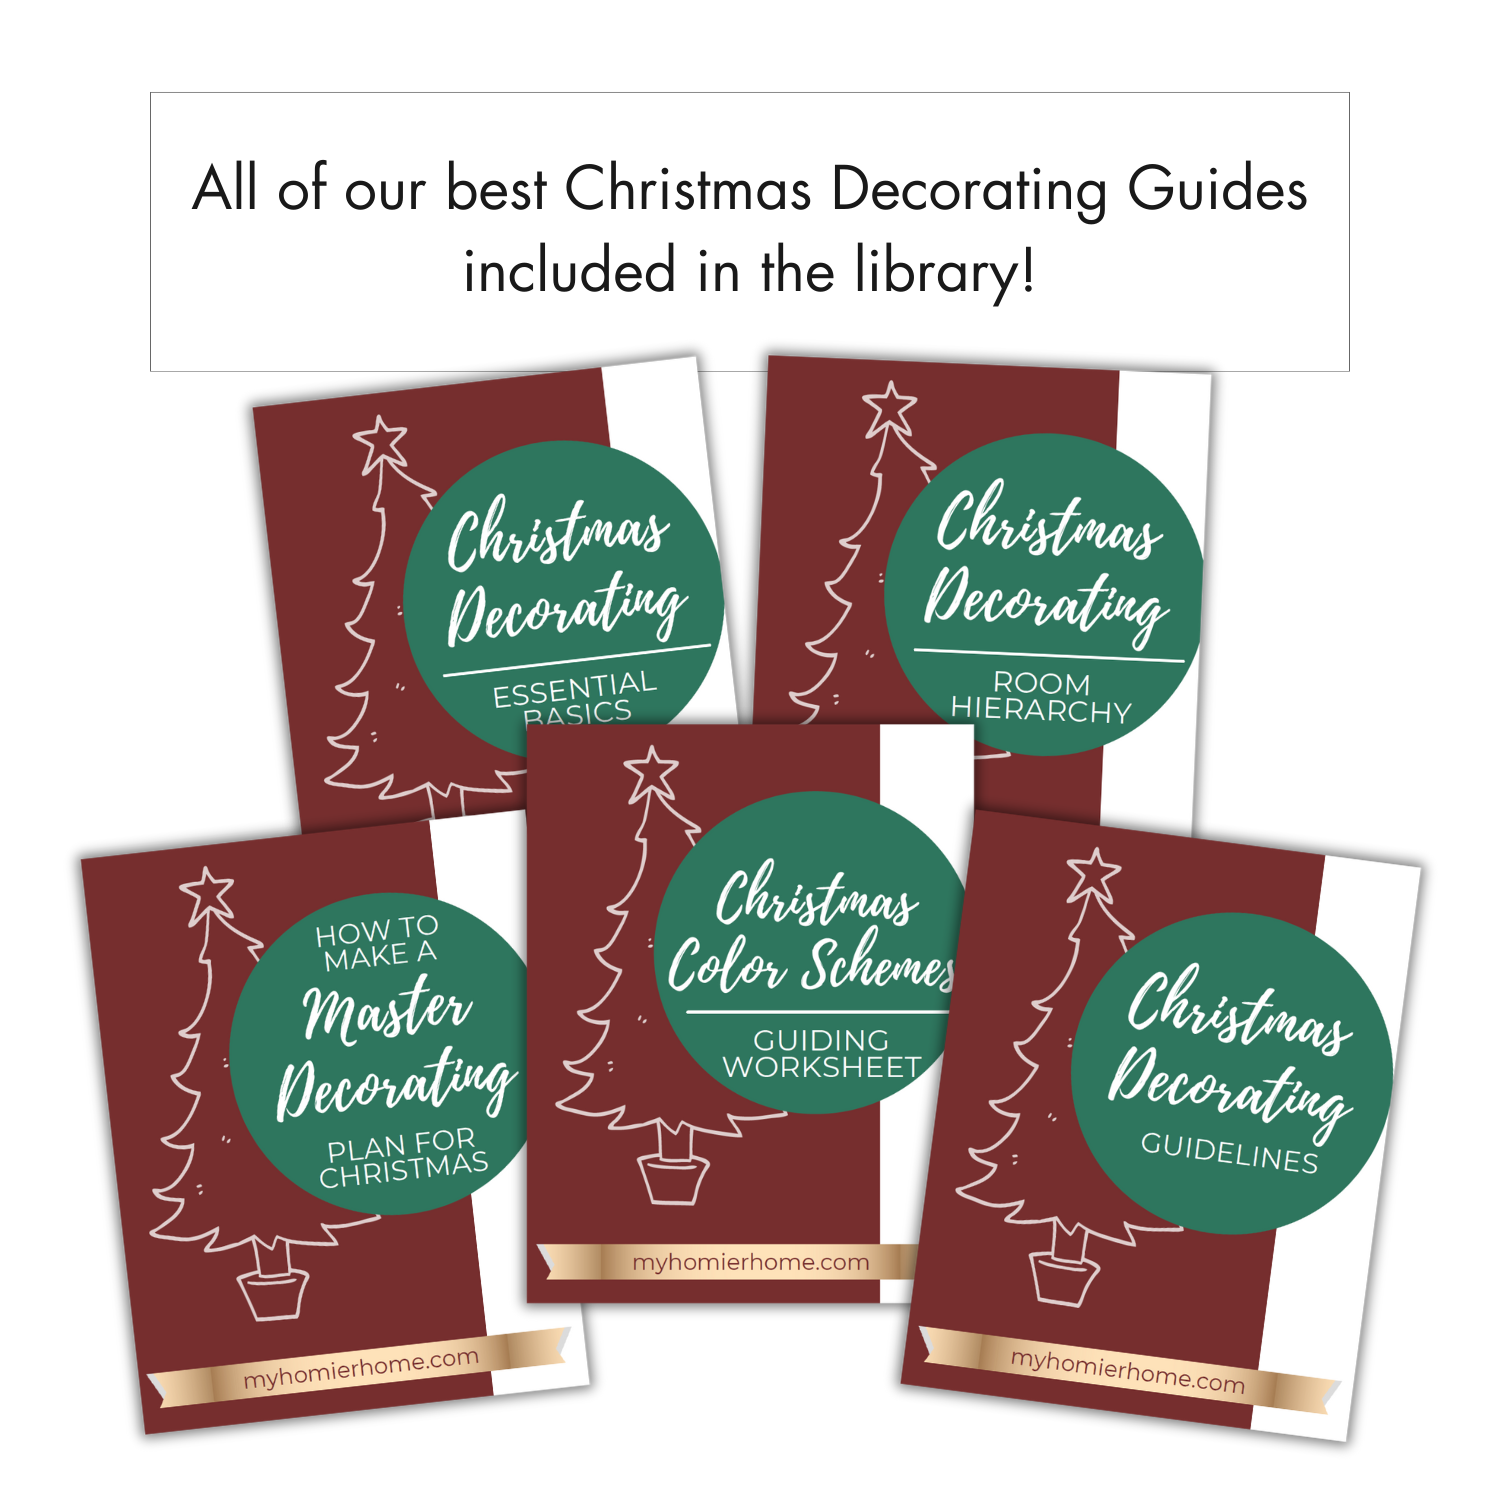 All best Christmas Prep Library guides in the library, perfect for those looking to host festive gatherings or seeking gift-giving inspiration. (Brand Name: My Homier Home)